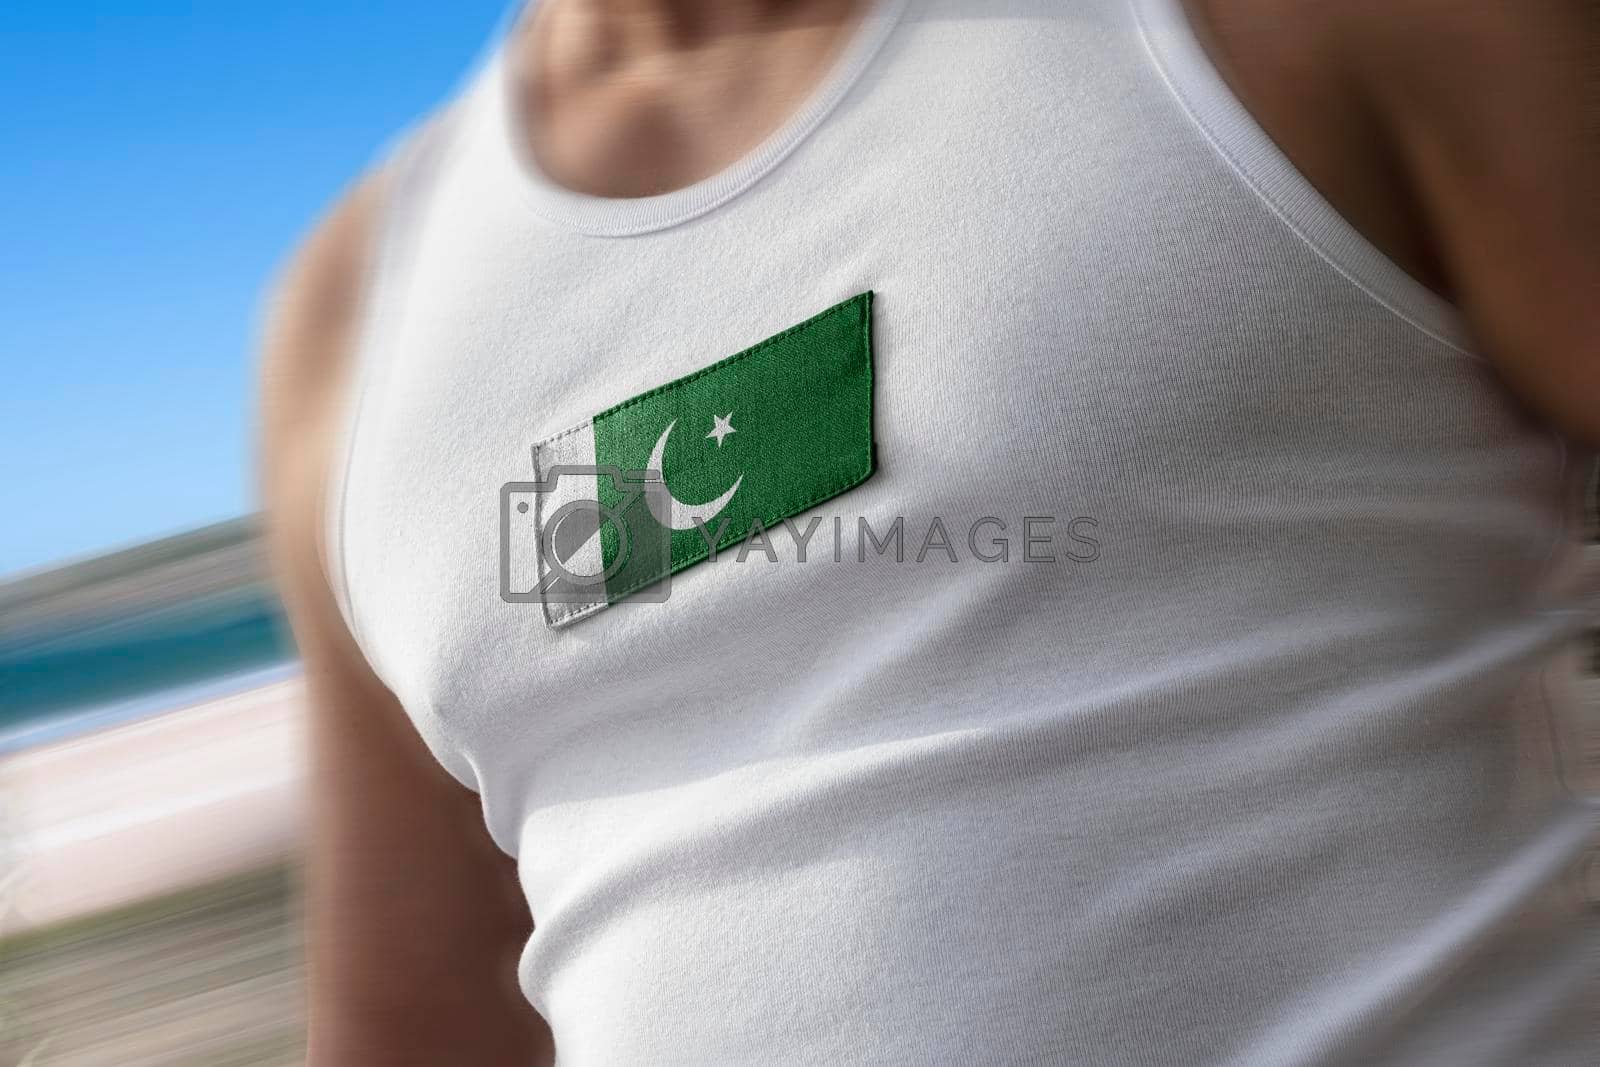 Royalty free image of The national flag of Pakistan on the athlete's chest by butenkow